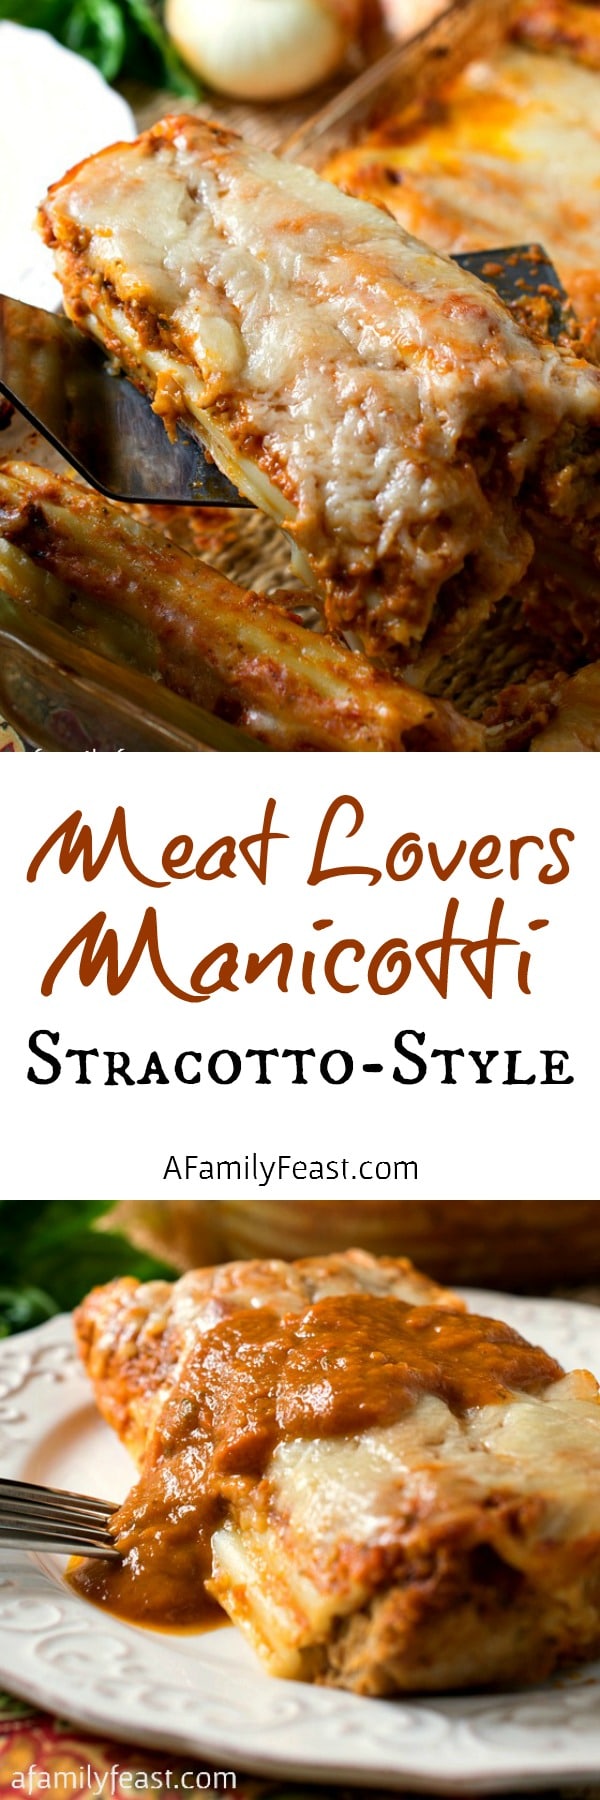 Meat Lovers Manicotti Stracotto-Style - A meat-filled twist on a classic cheese-stuffed manicotti. Incredible flavors!